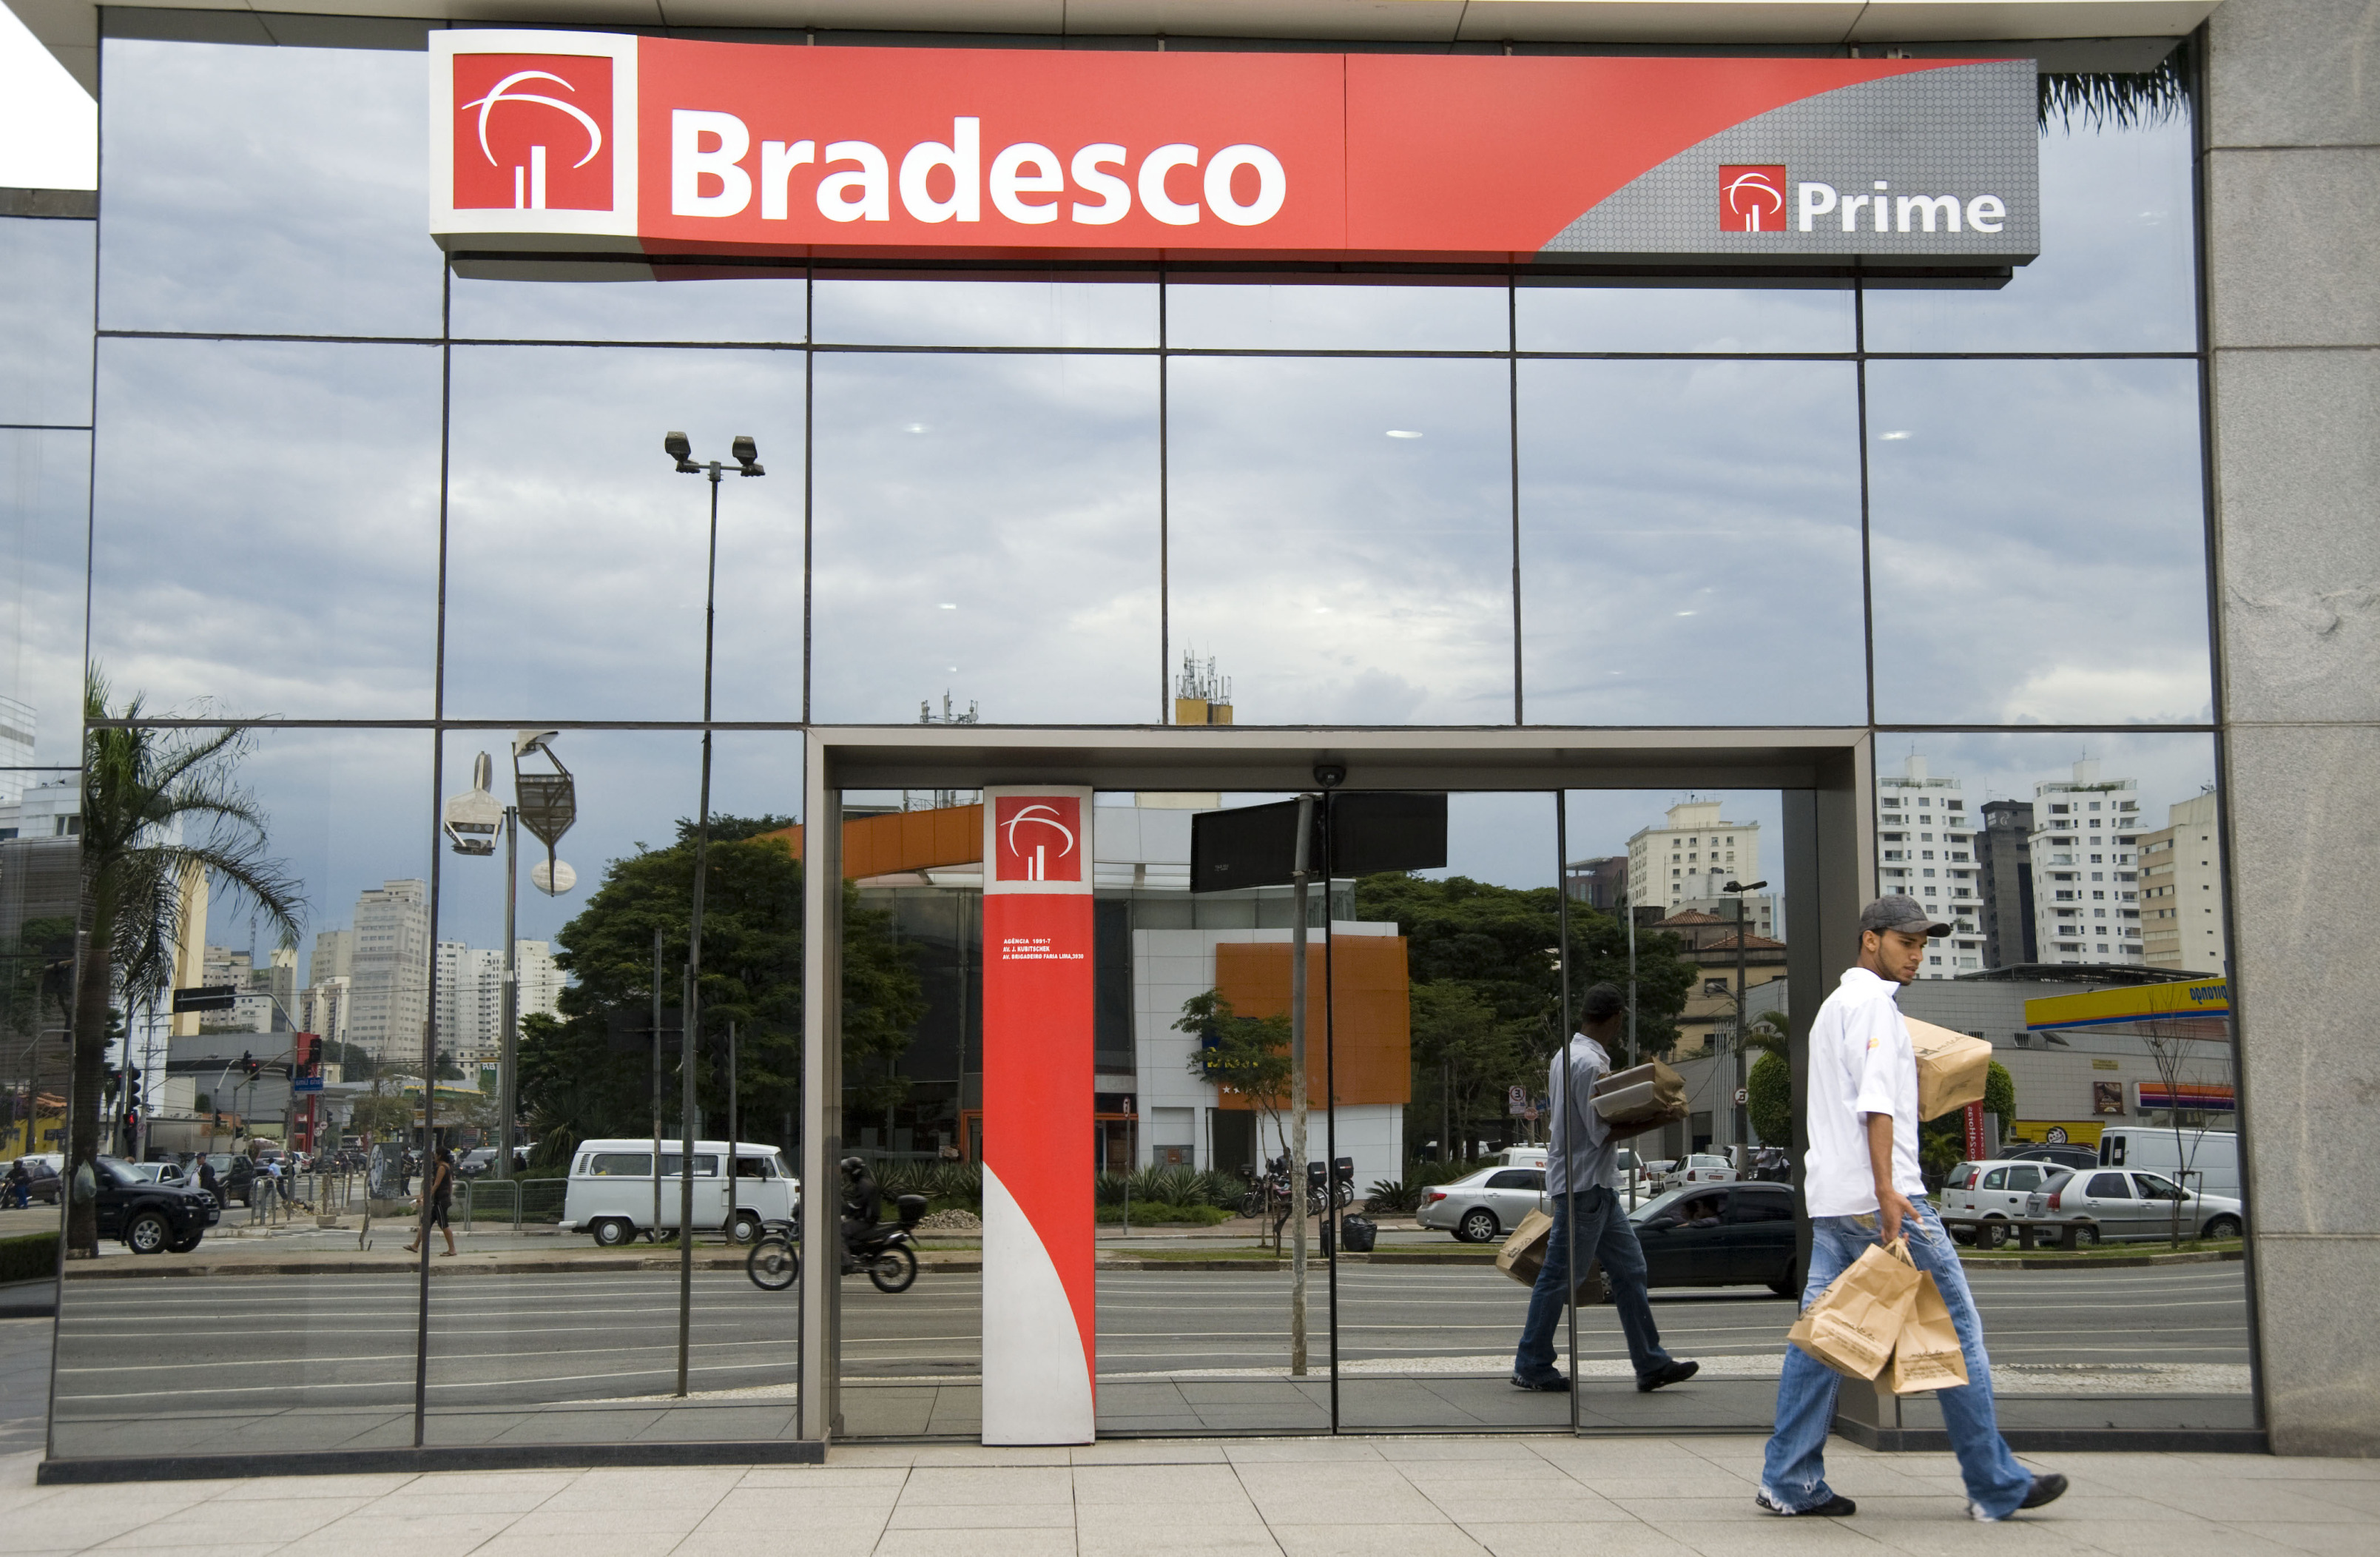 Bradesco Hunts for More US Fintech Partners to Speed Expansion - Bloomberg